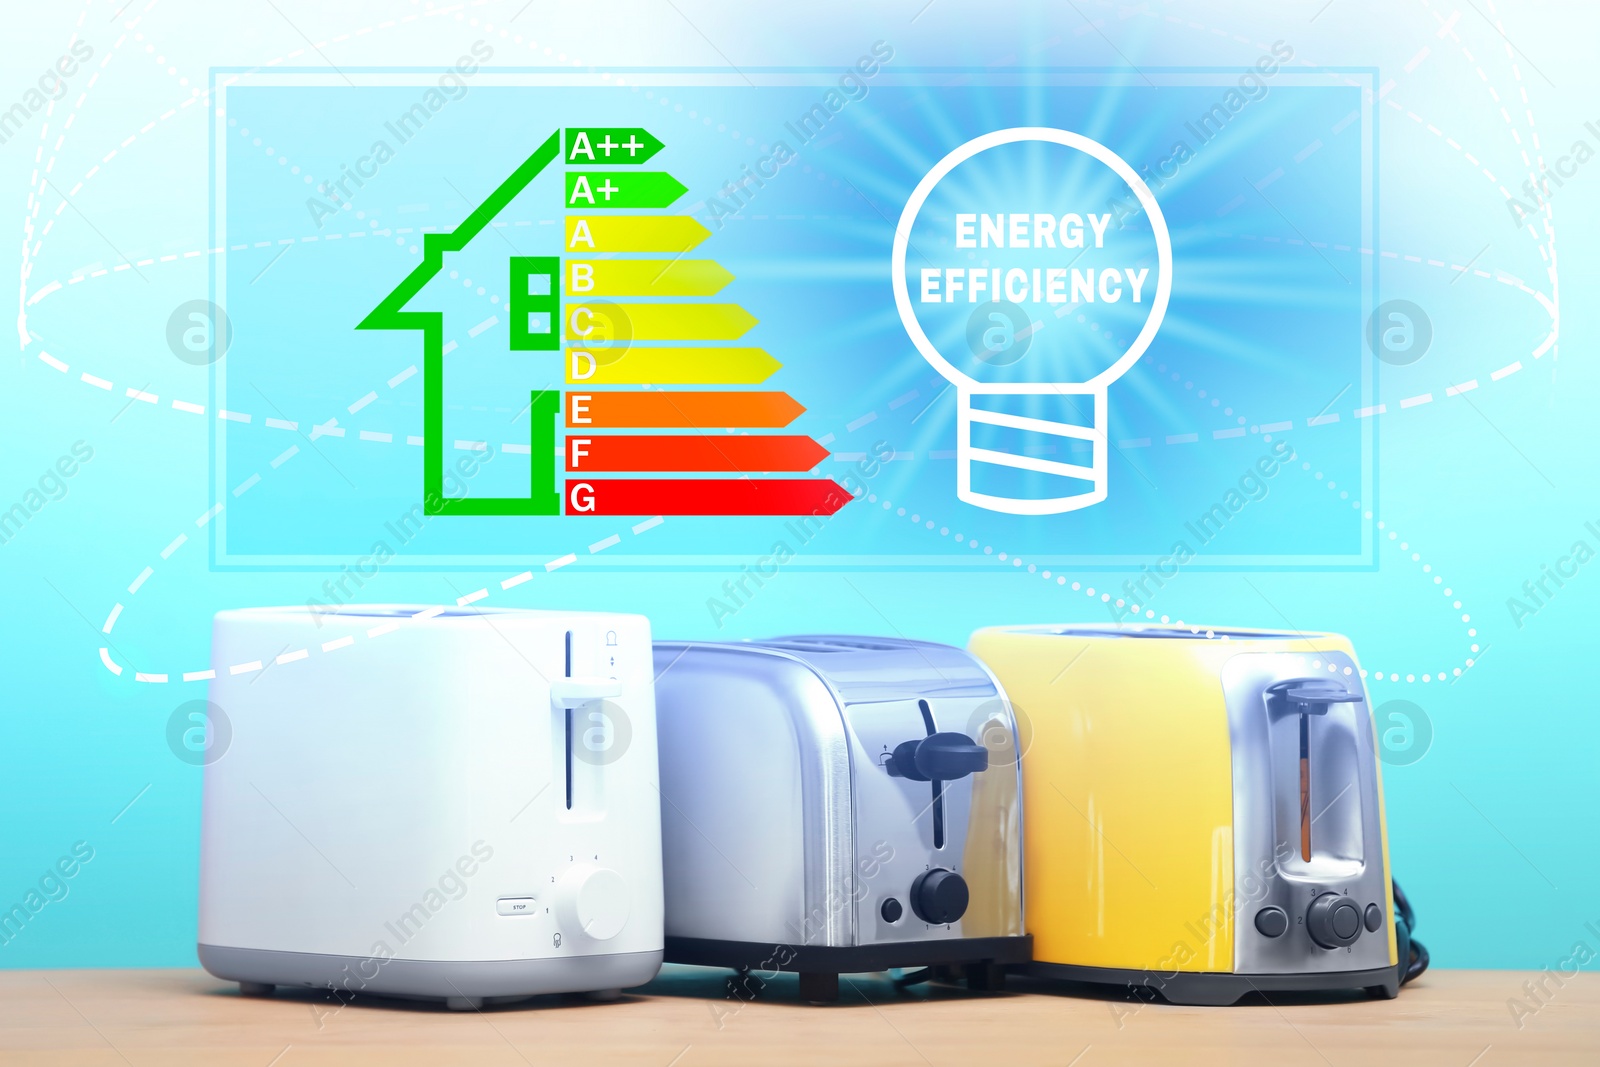 Image of Energy efficiency rating label and illustration of light bulb over different toasters on light blue background